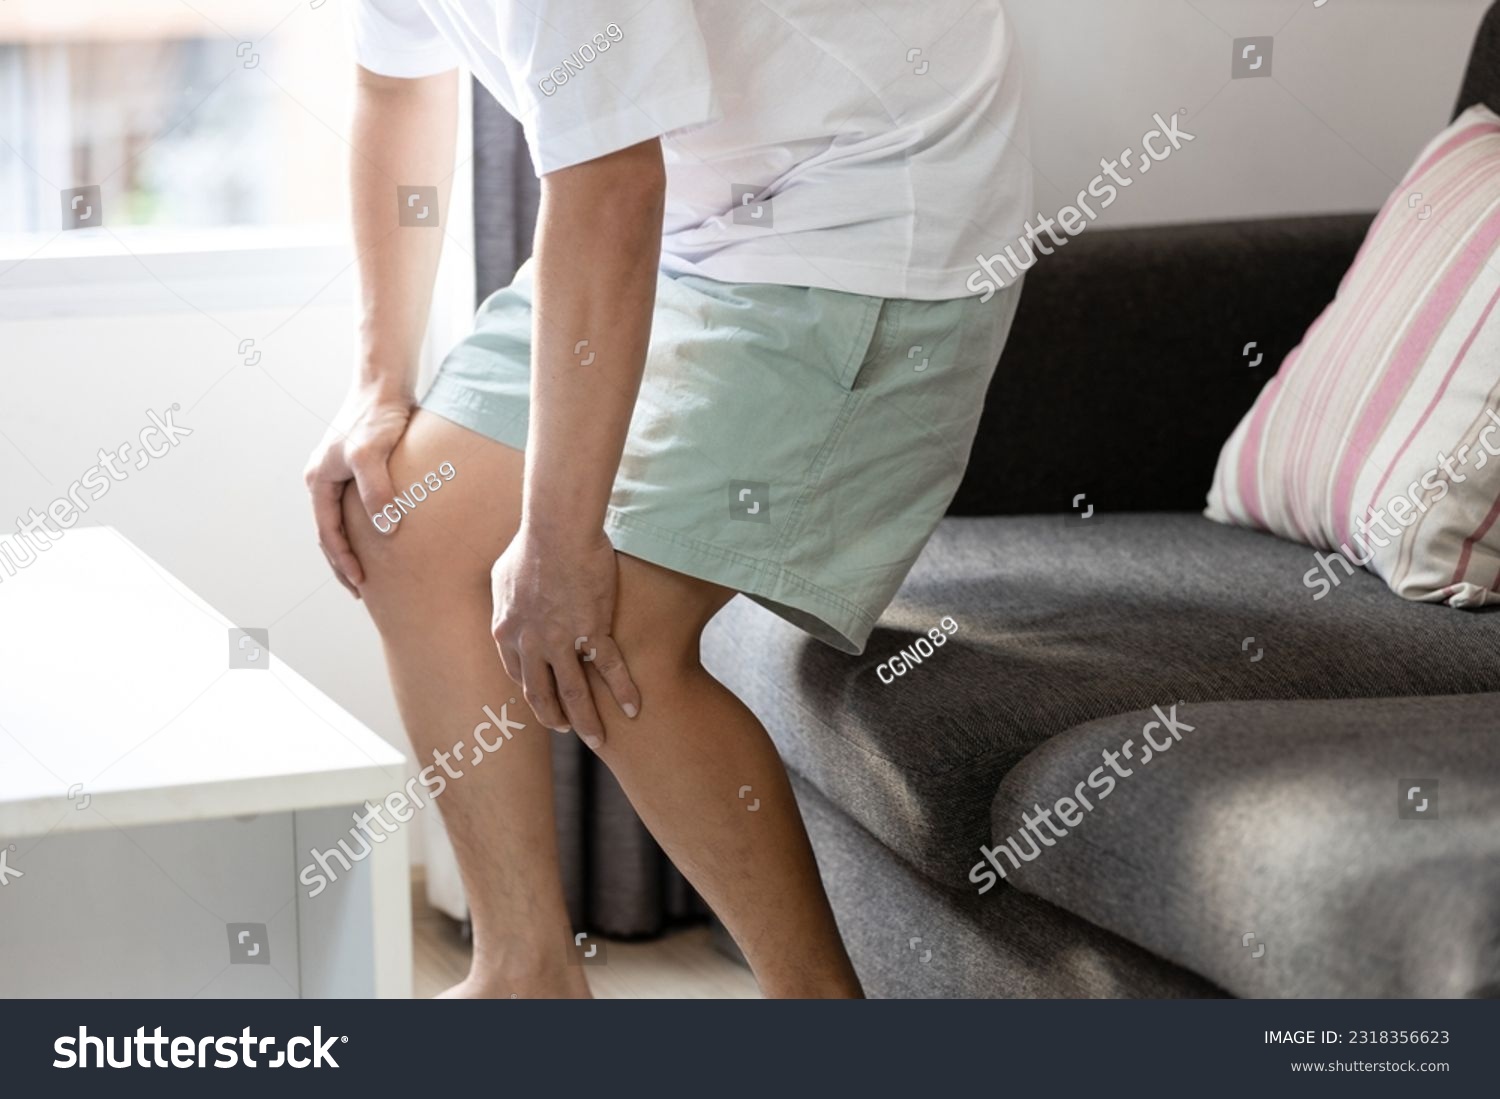 Middle aged man holding knees,pain in kneecap or muscles around knee joint,patella friction against the thigh bone,standing up with difficulty,disease of Runner's knee or Patellofemoral pain syndrome #2318356623